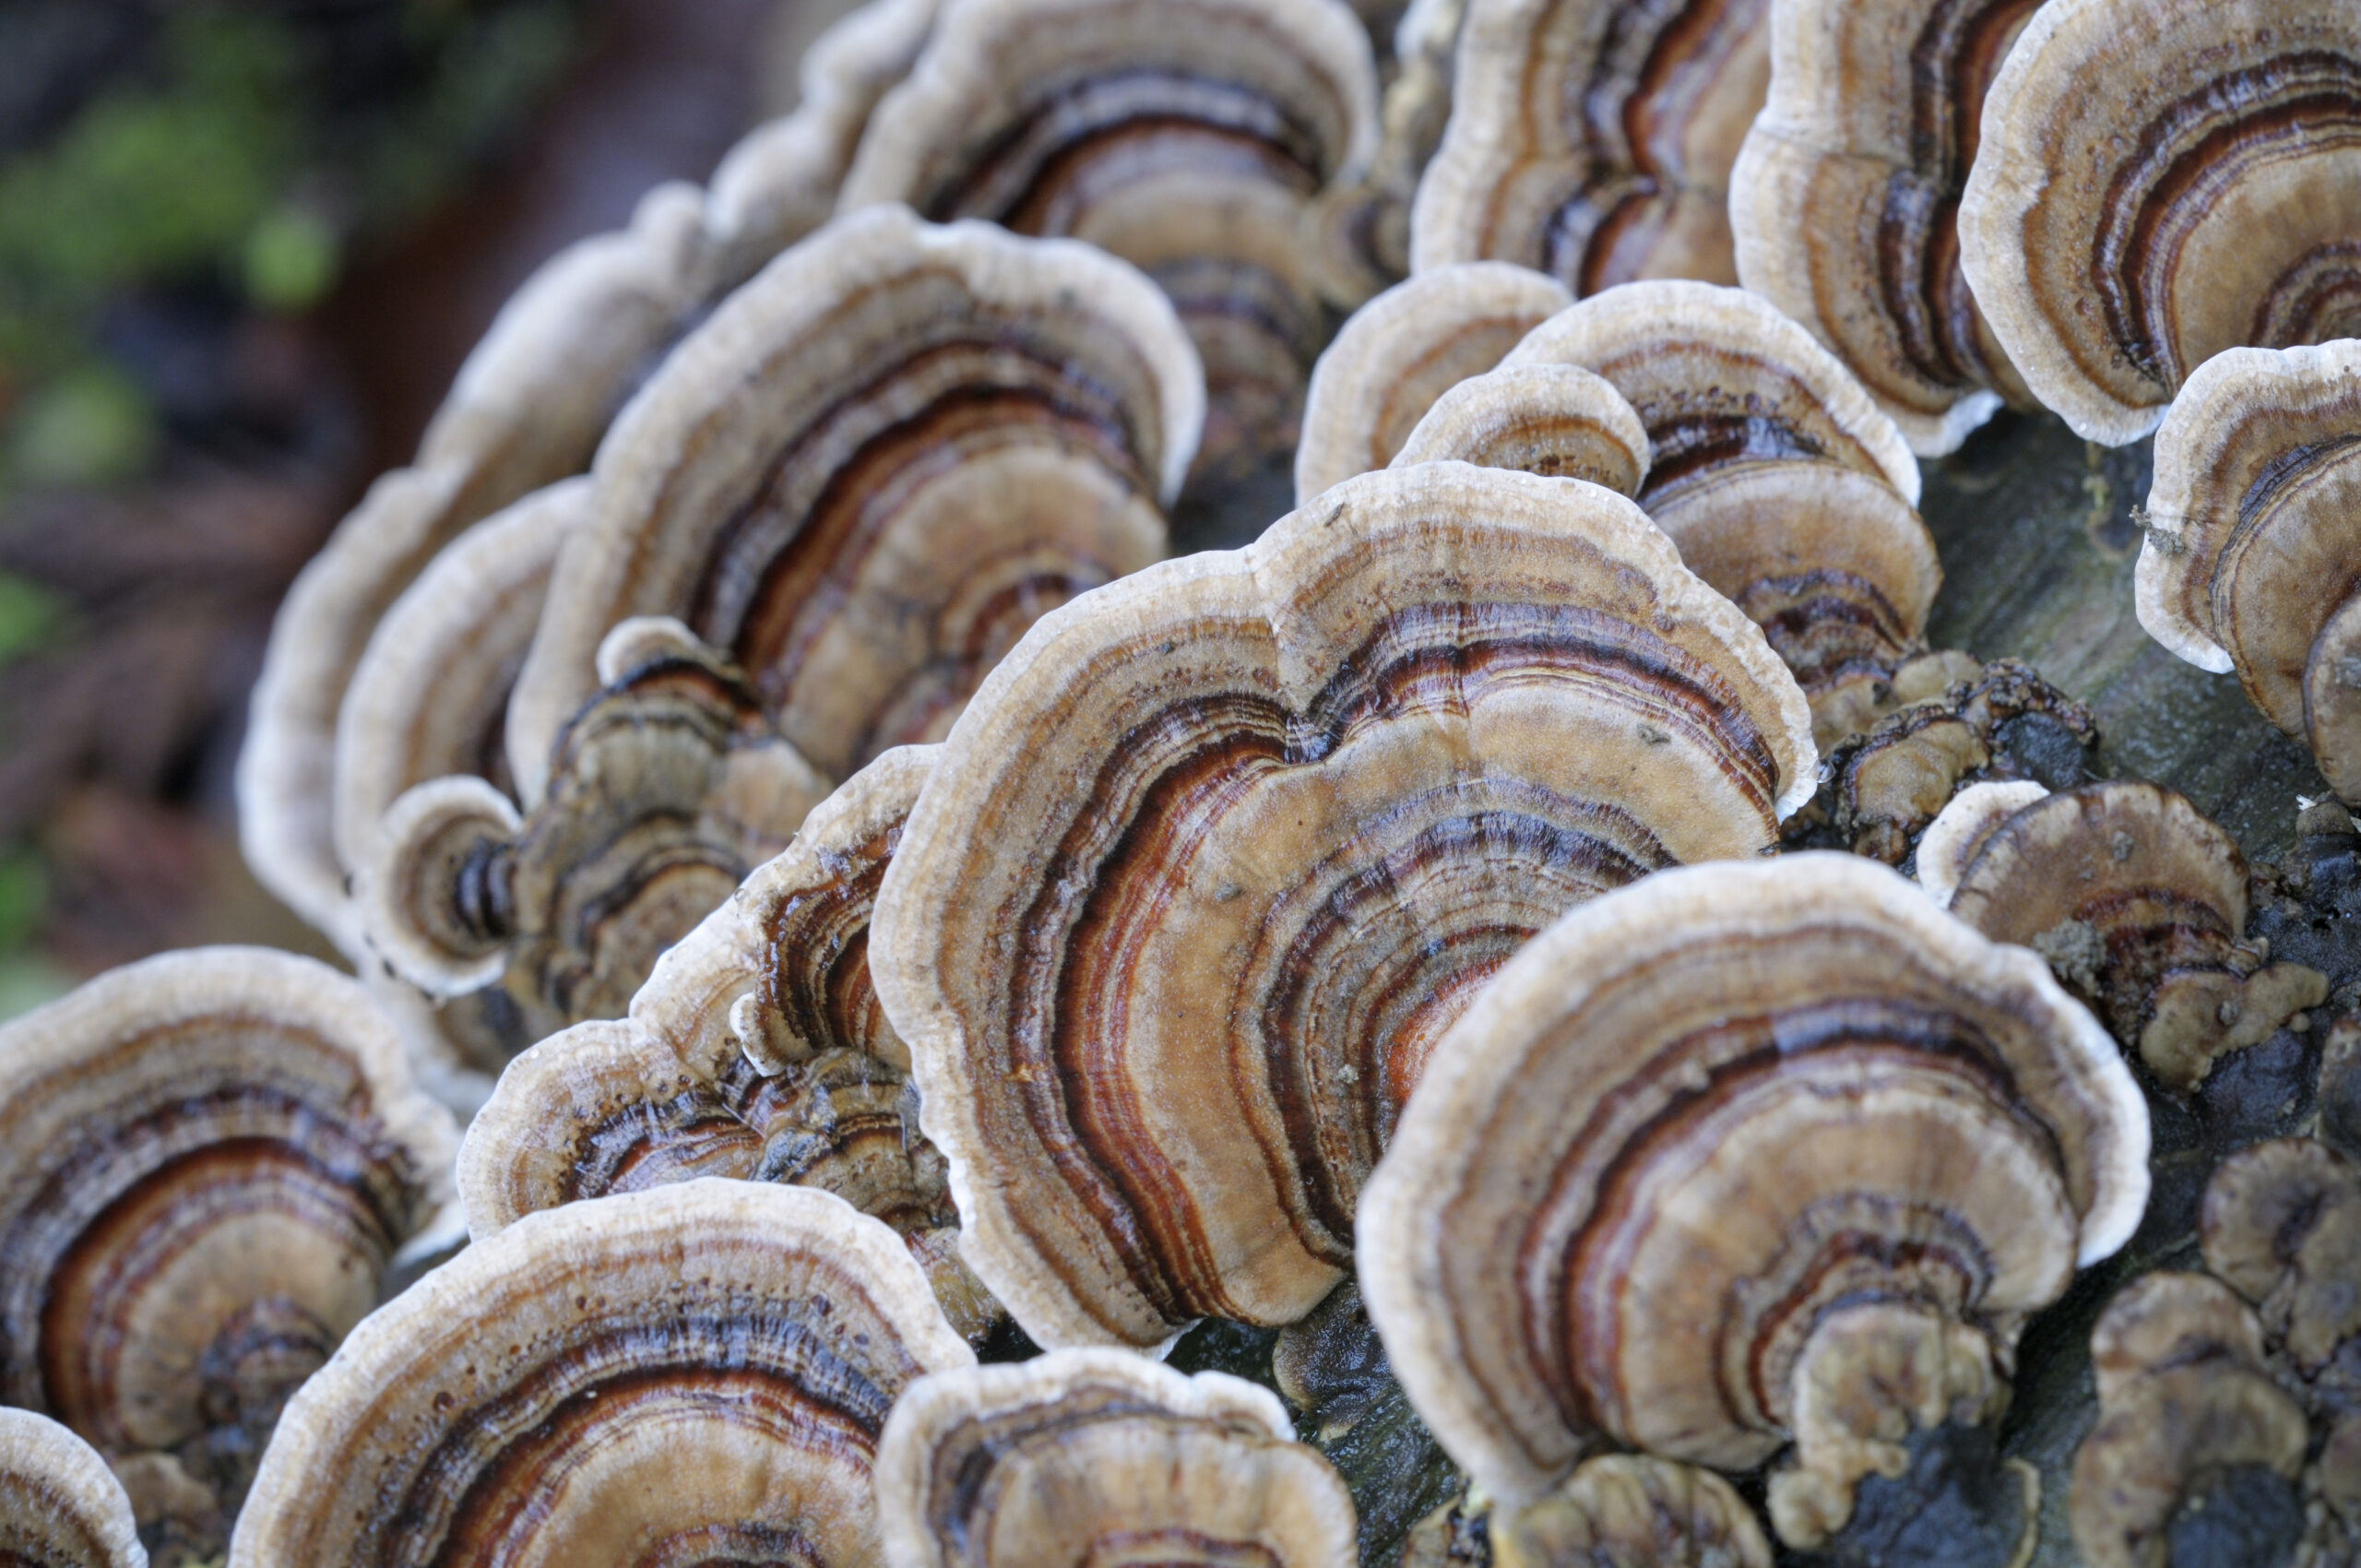 Turkey tail. Chaga. Lion’s mane. Do these mushroom supplements genuinely offer health benefits?